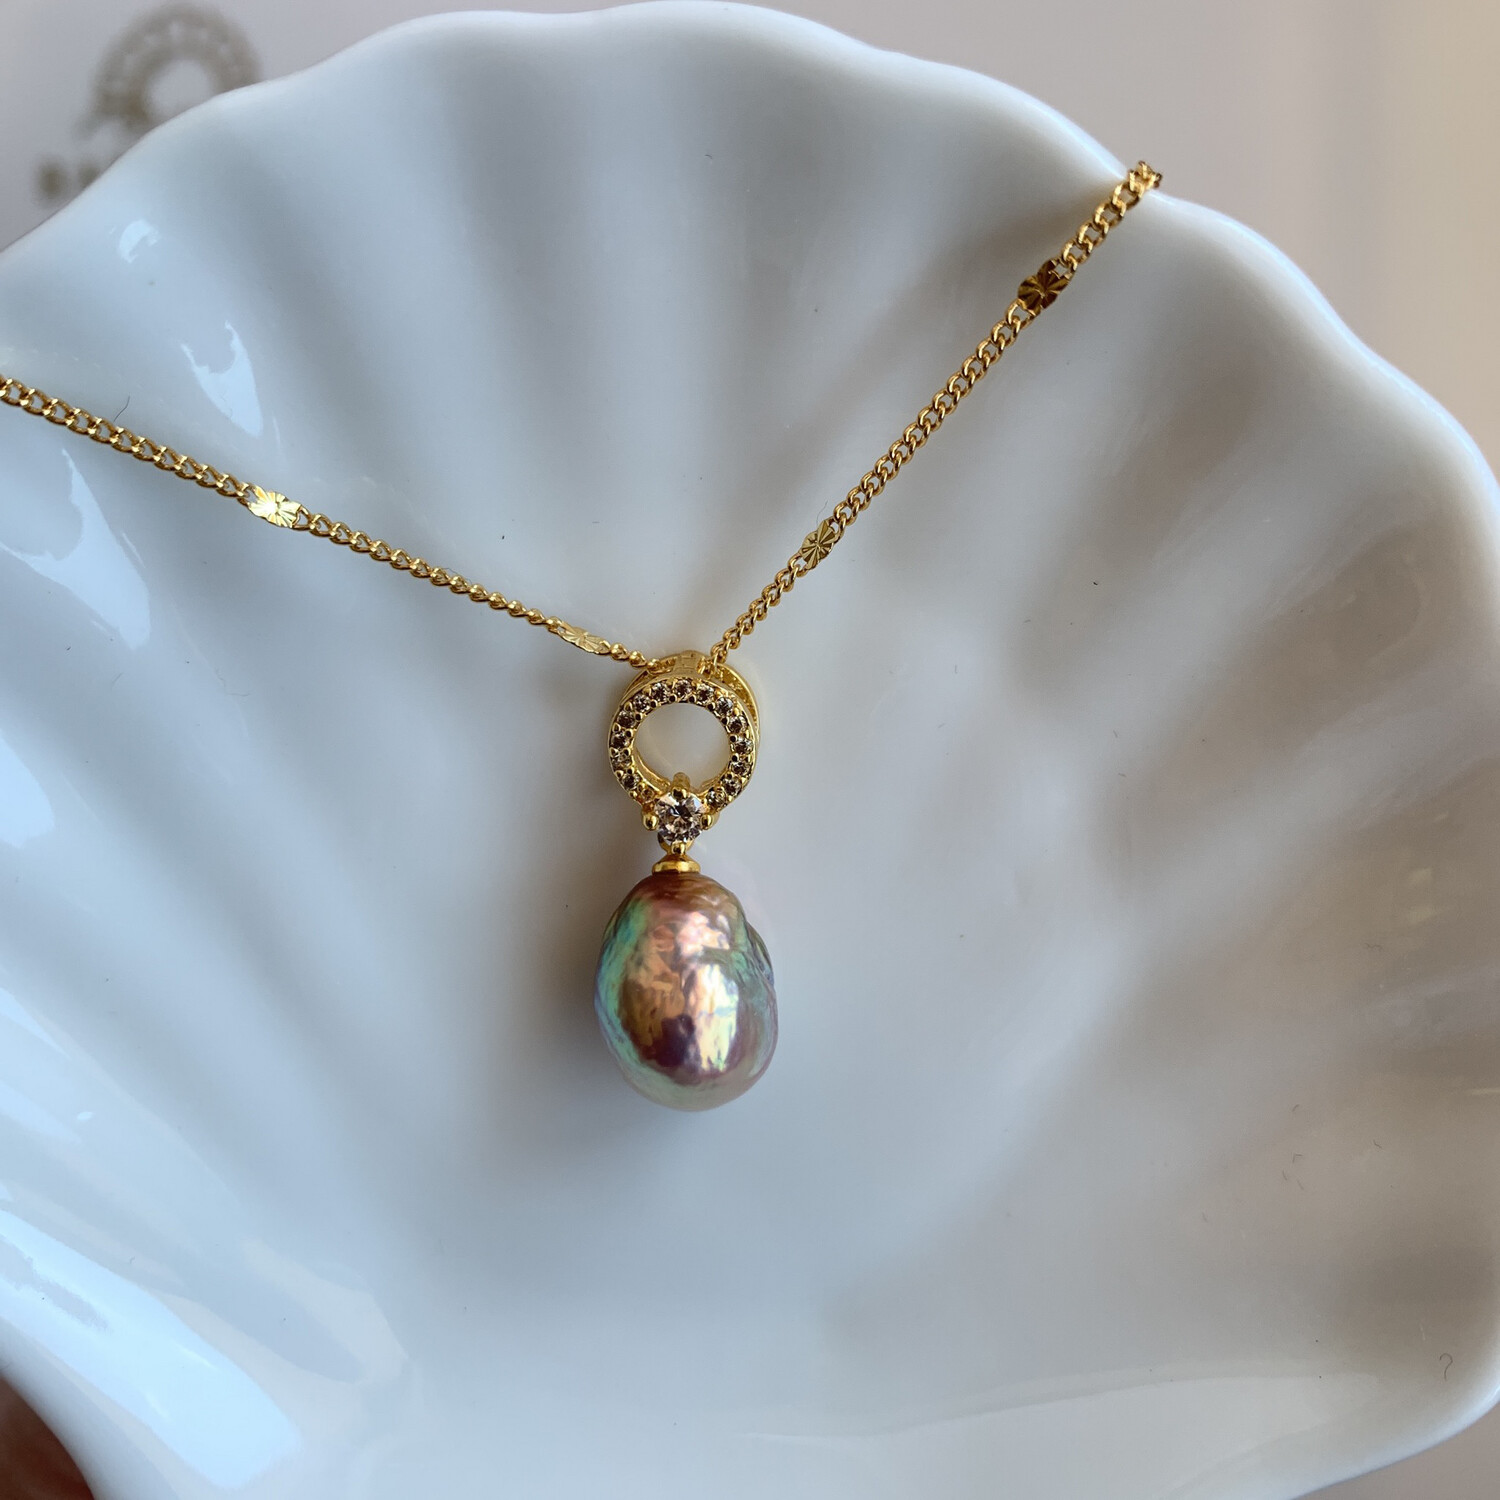 'Rising Sun' (Gradient21) baroque pearl necklace
13x10.5mm